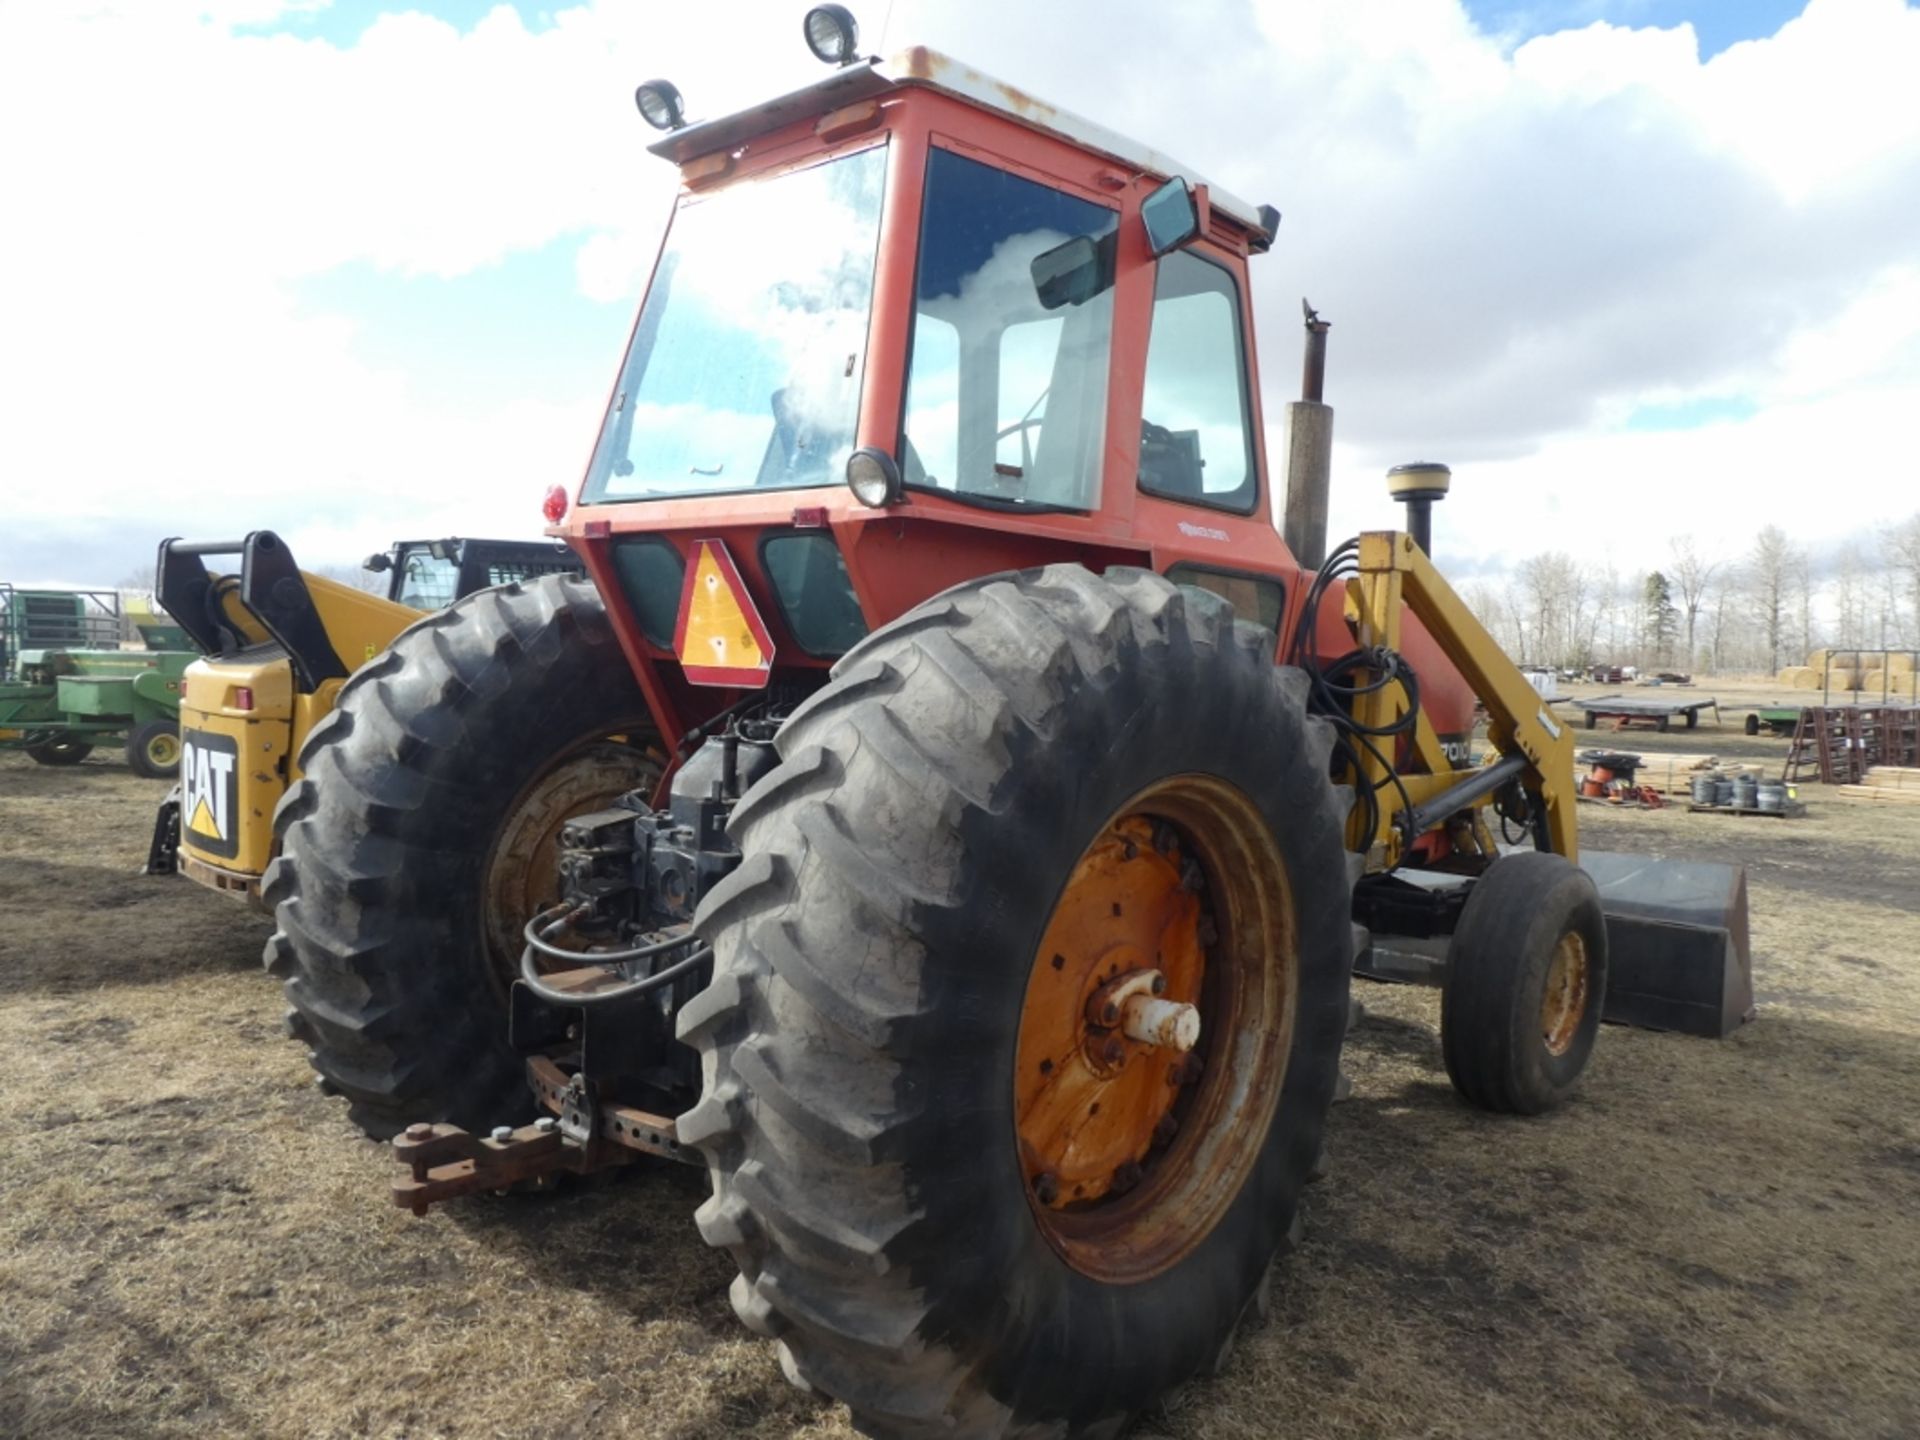 ALLIS CHALMERS 7010 TRACTOR W/ EZEE-ON 100 FRONT END LOADER W/ POWER SHIFT TRANSMISSION, 6700HR - Image 3 of 7